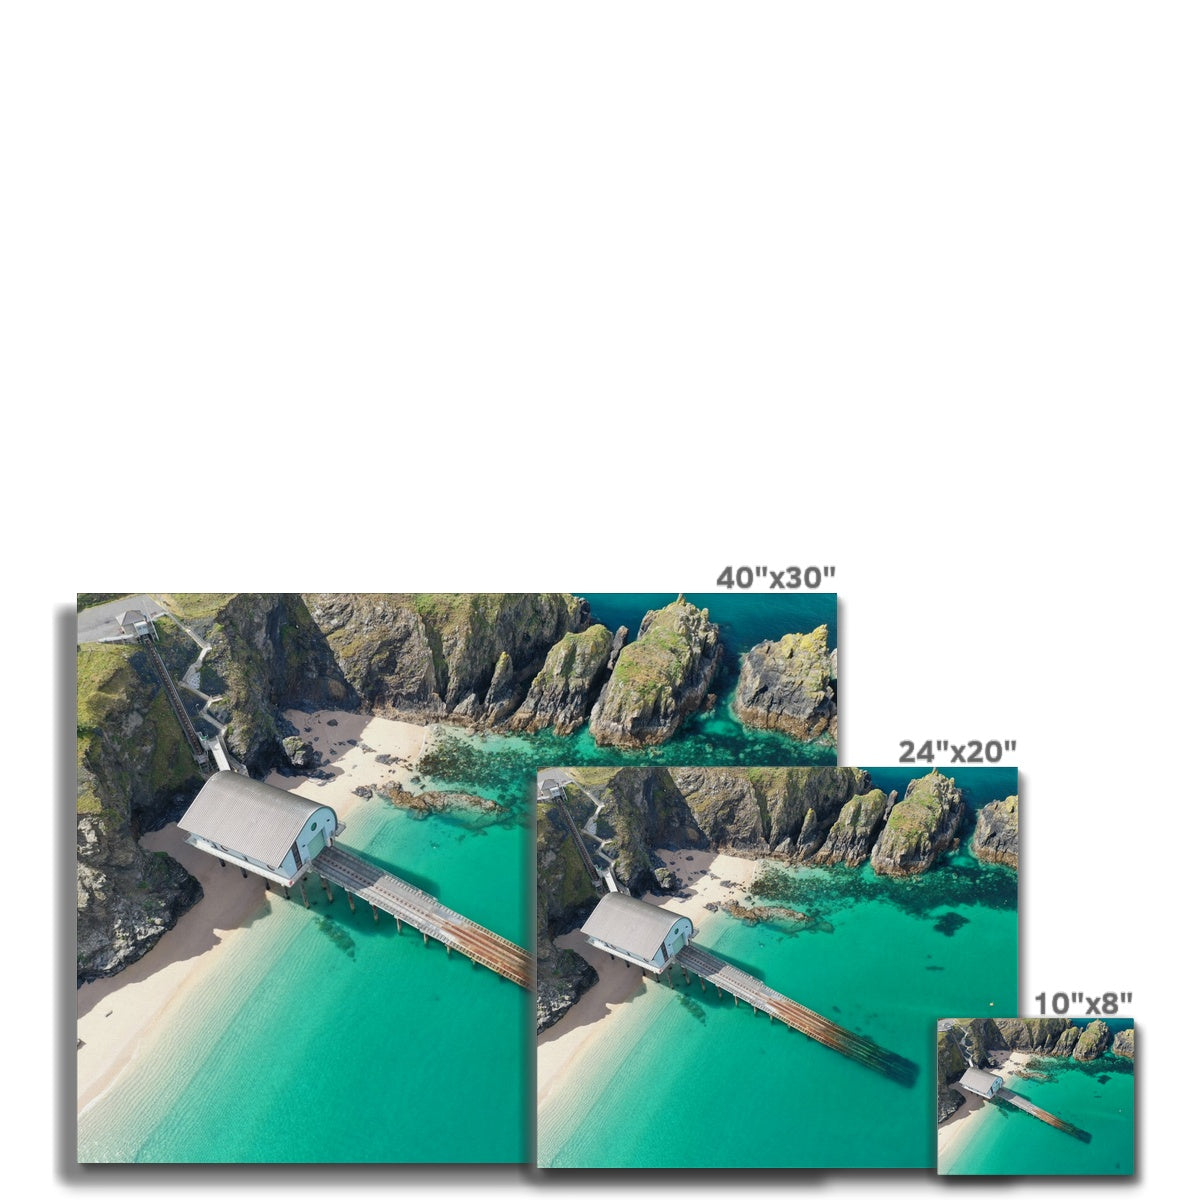 padstow lifeboat station canvas sizes